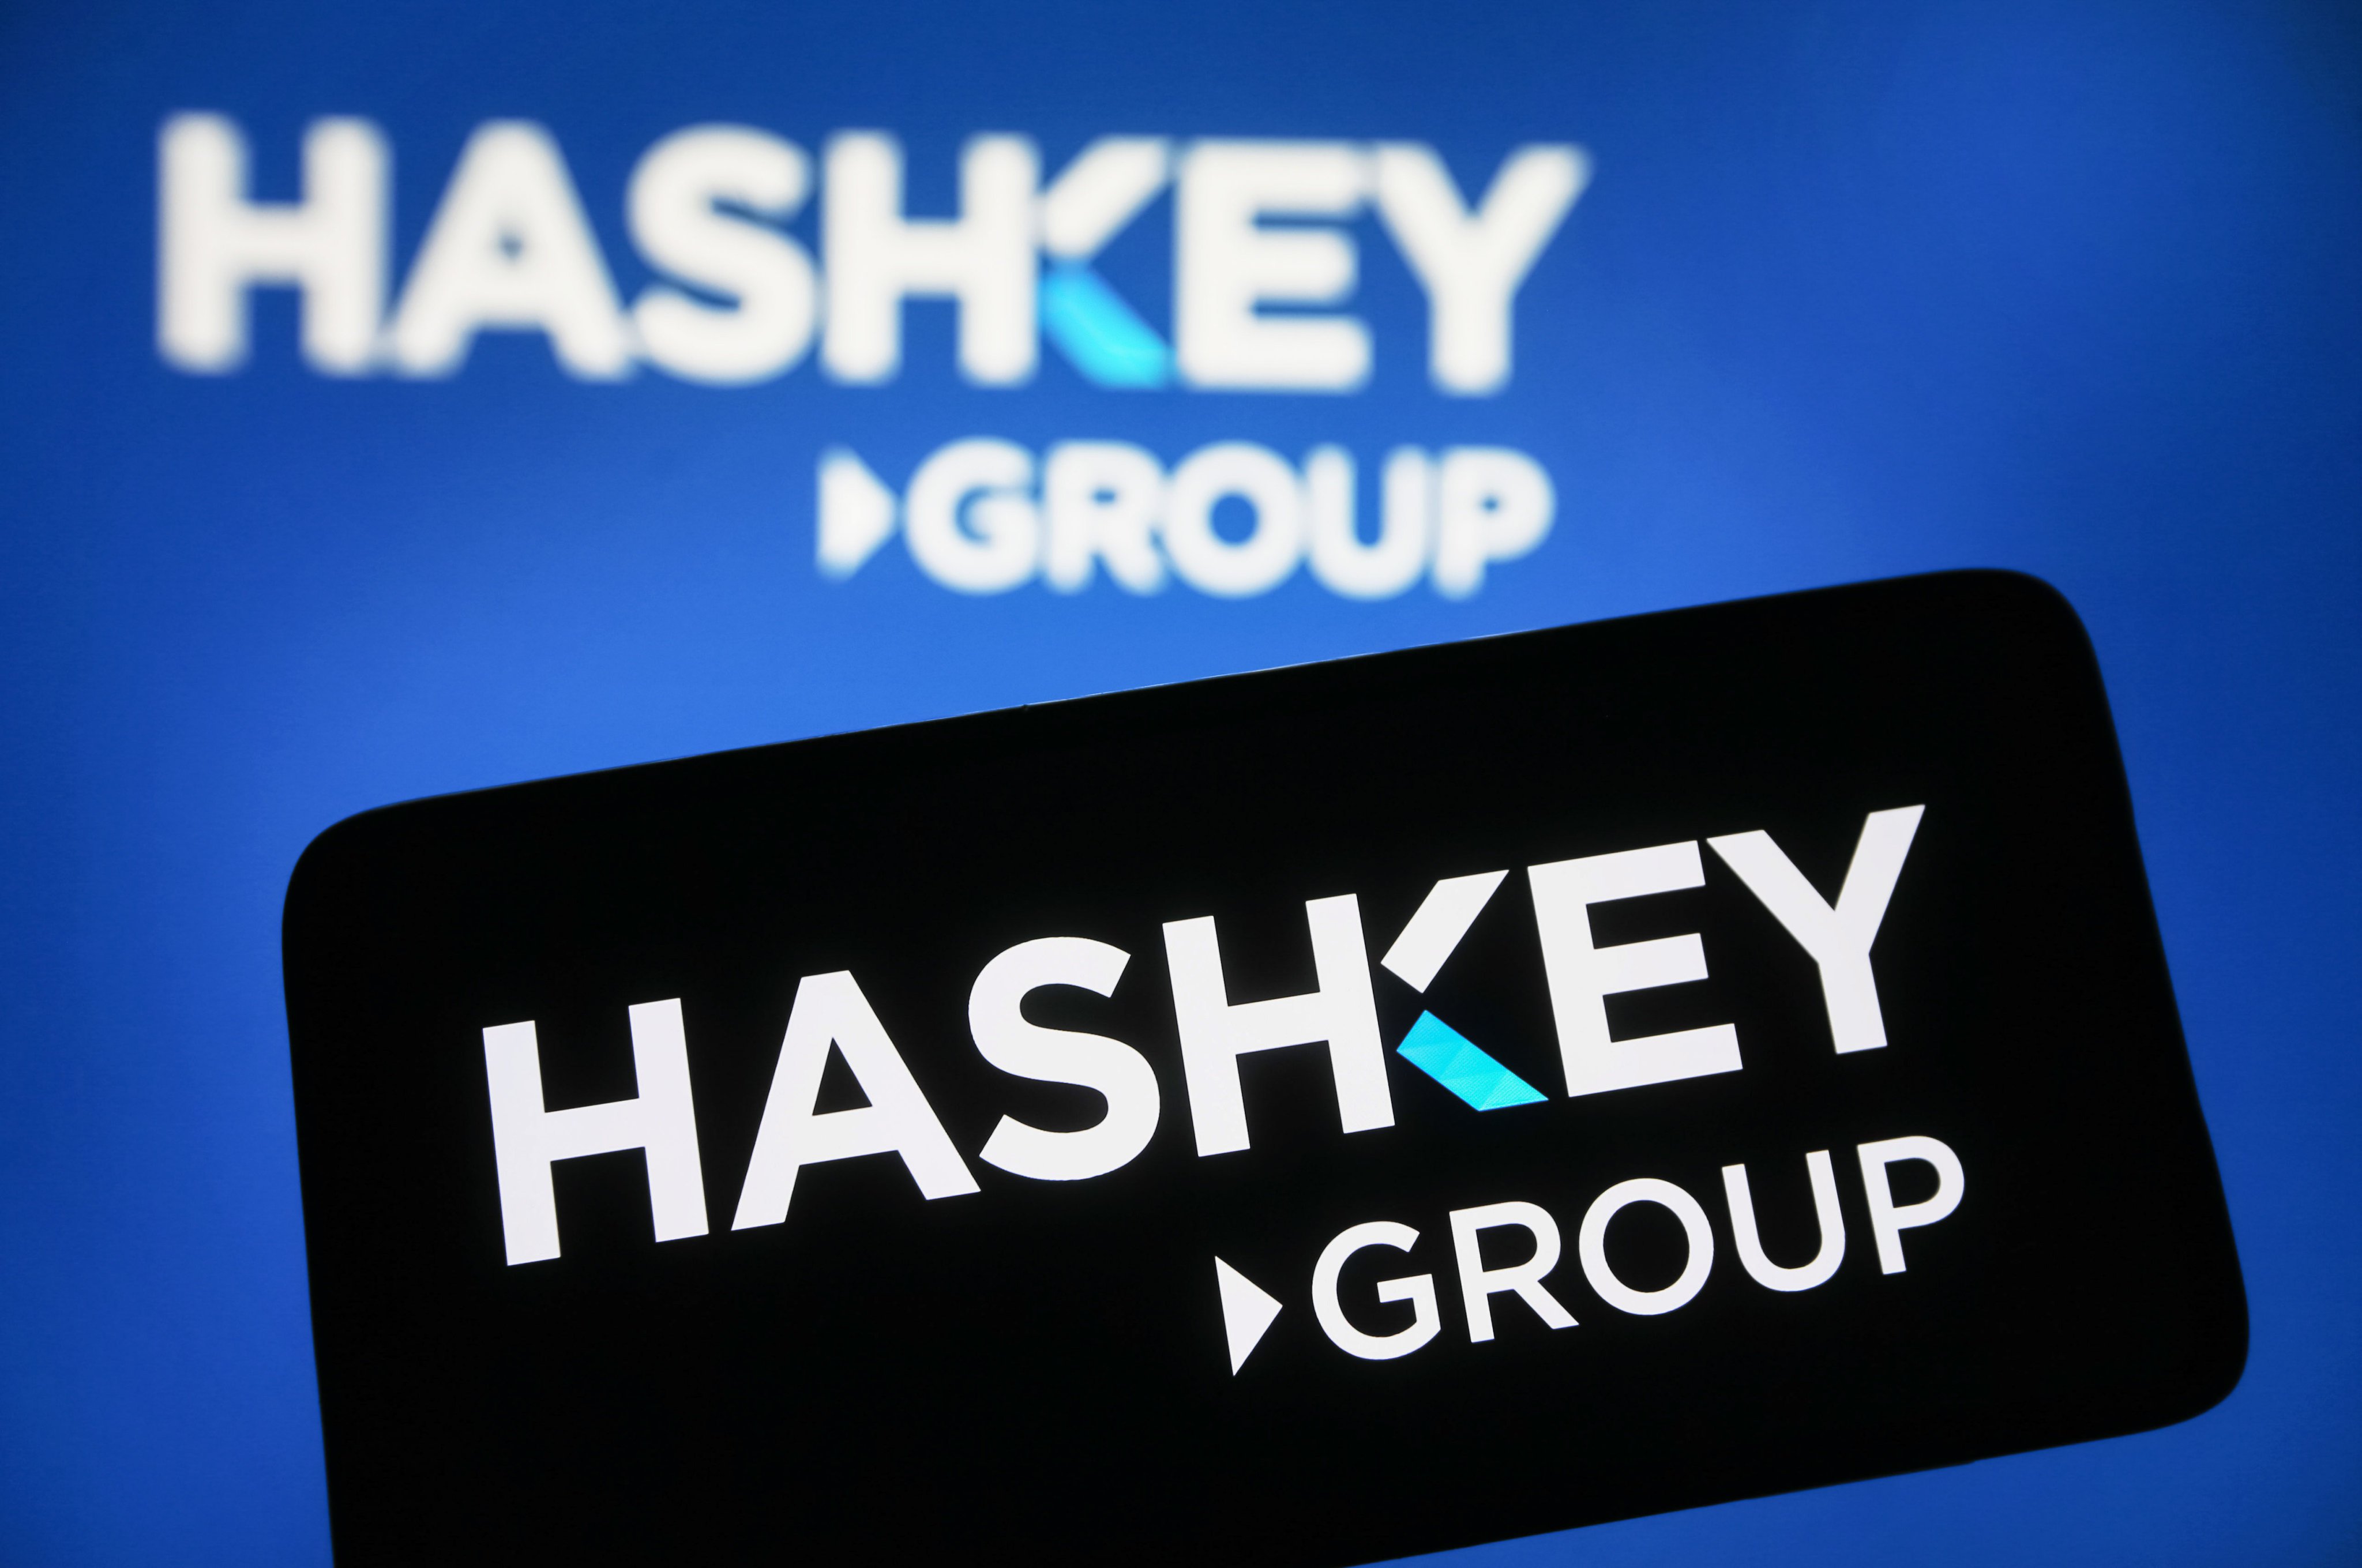 HashKey Group’s logo displayed on a smartphone screen. Photo: SOPA Images/LightRocket via Getty Images